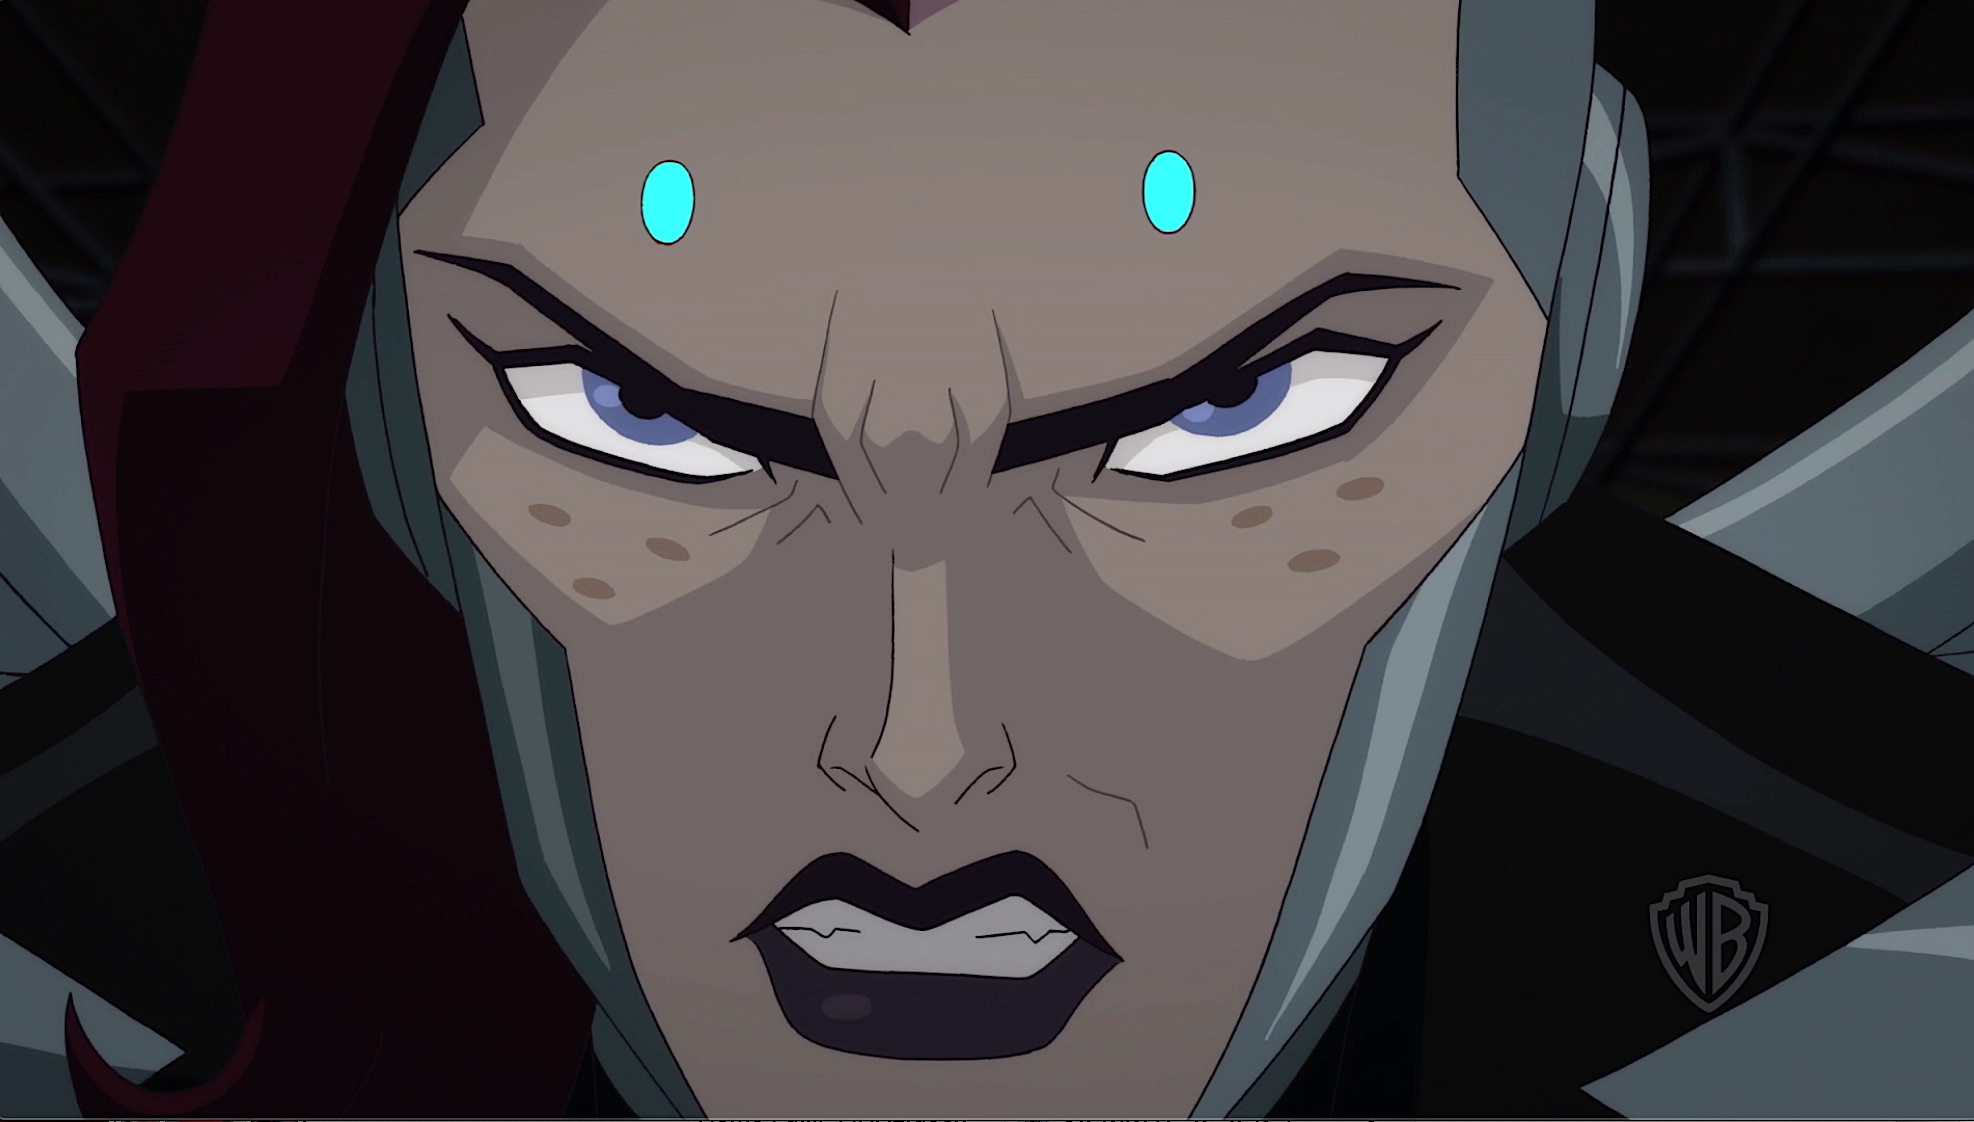 Wonder Woman: Bloodlines' Animated Movie Announced